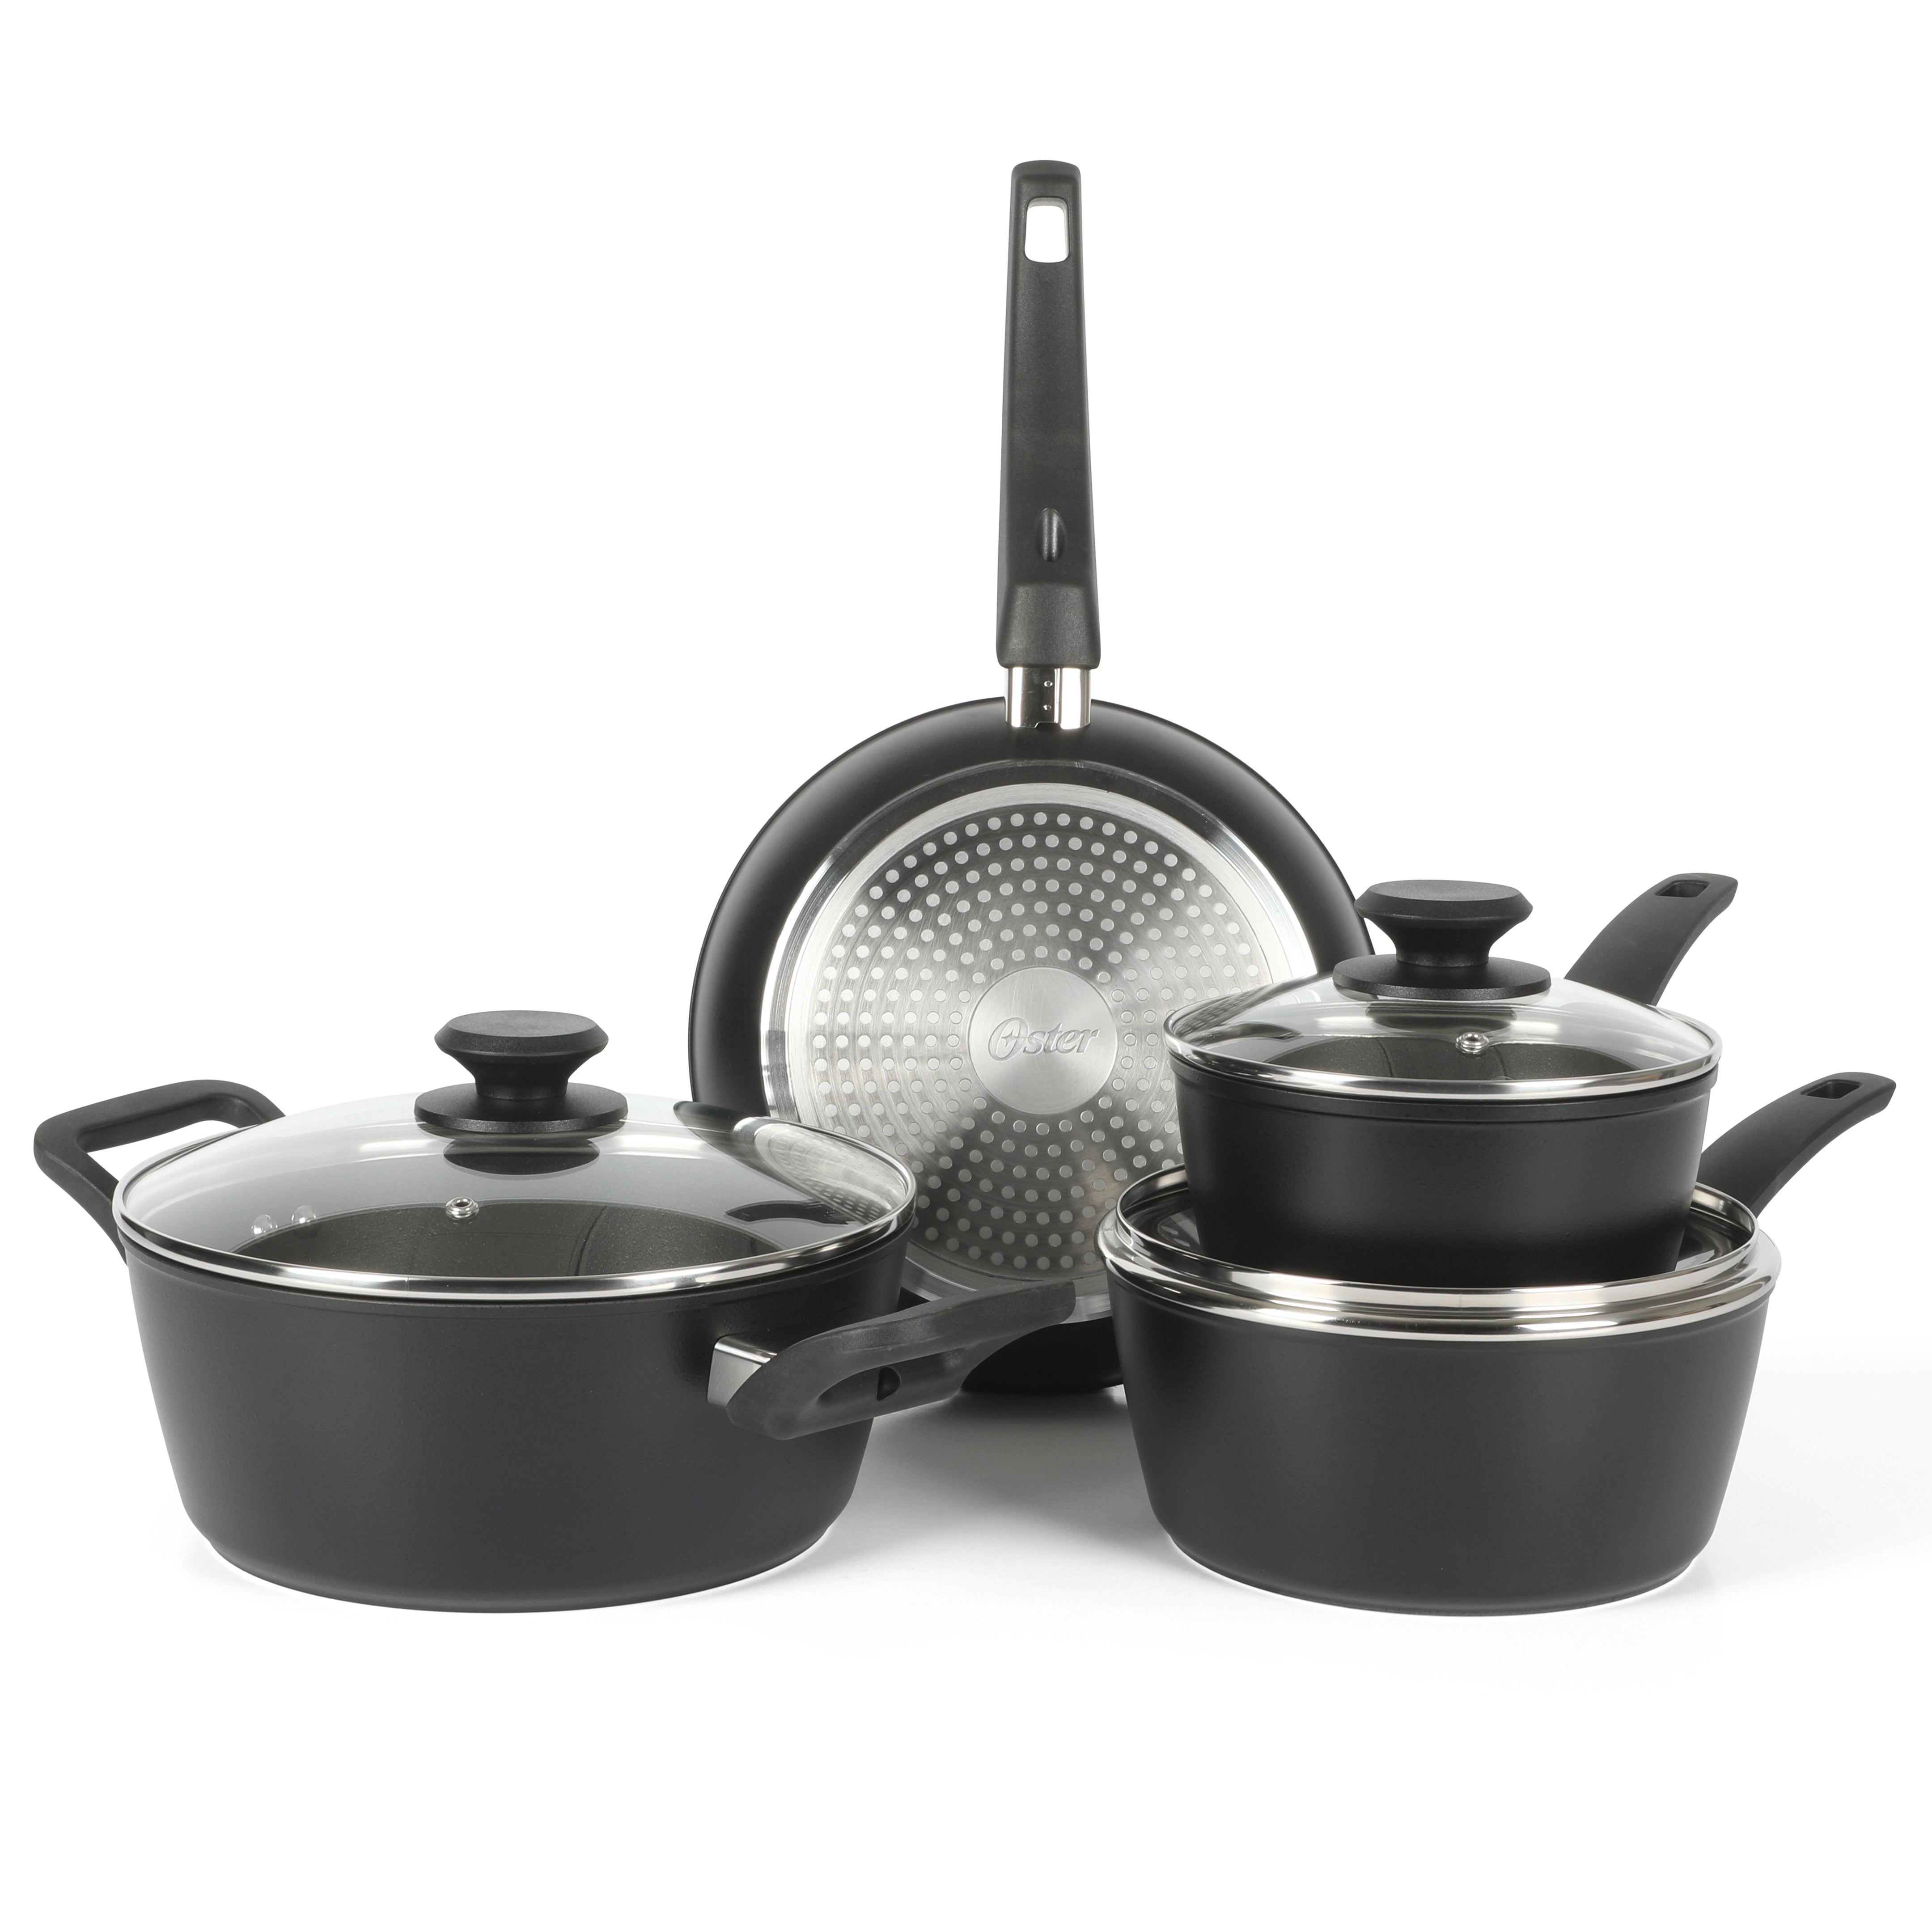 Oster Connelly 7-Piece Aluminum Premium Nonstick Pots and Pans Cookware Set w/ Induction & Bakelite Stay Cool Handle - Black